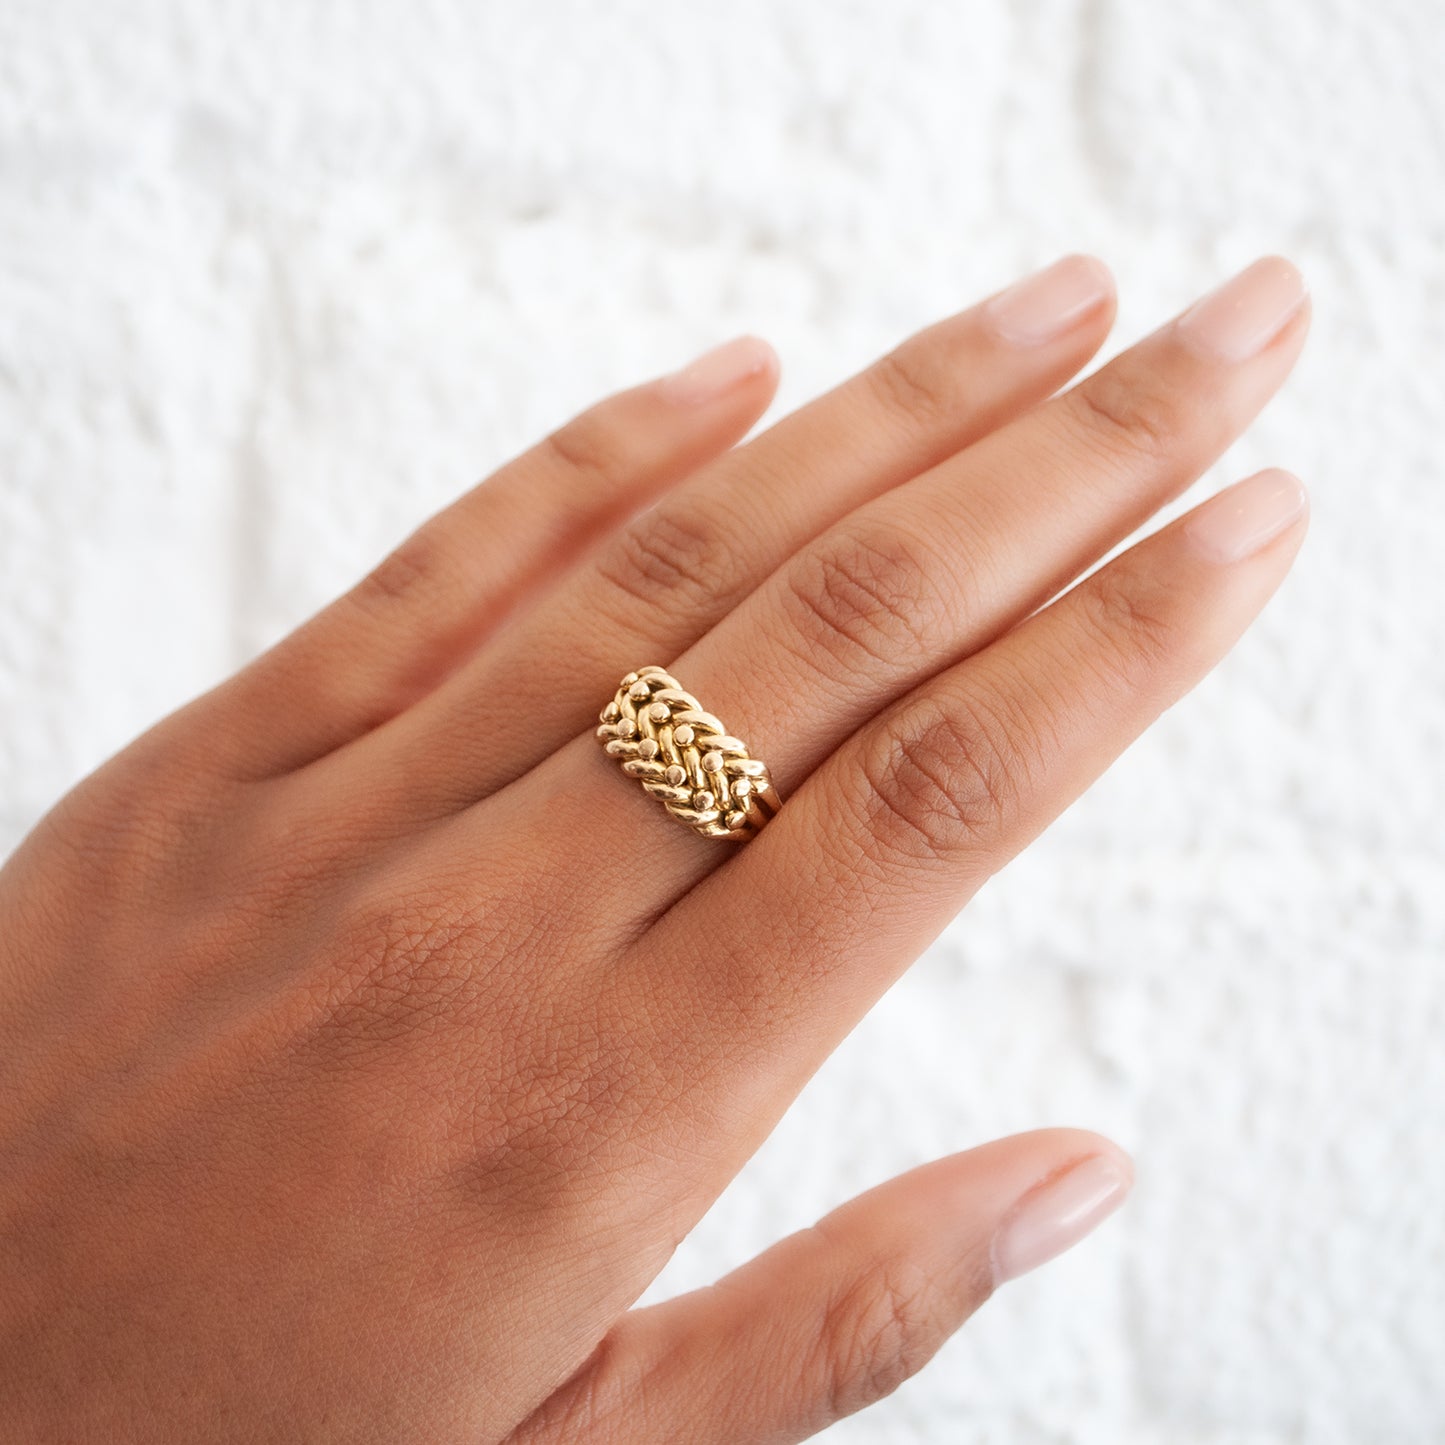 Love Knot Keeper Ring